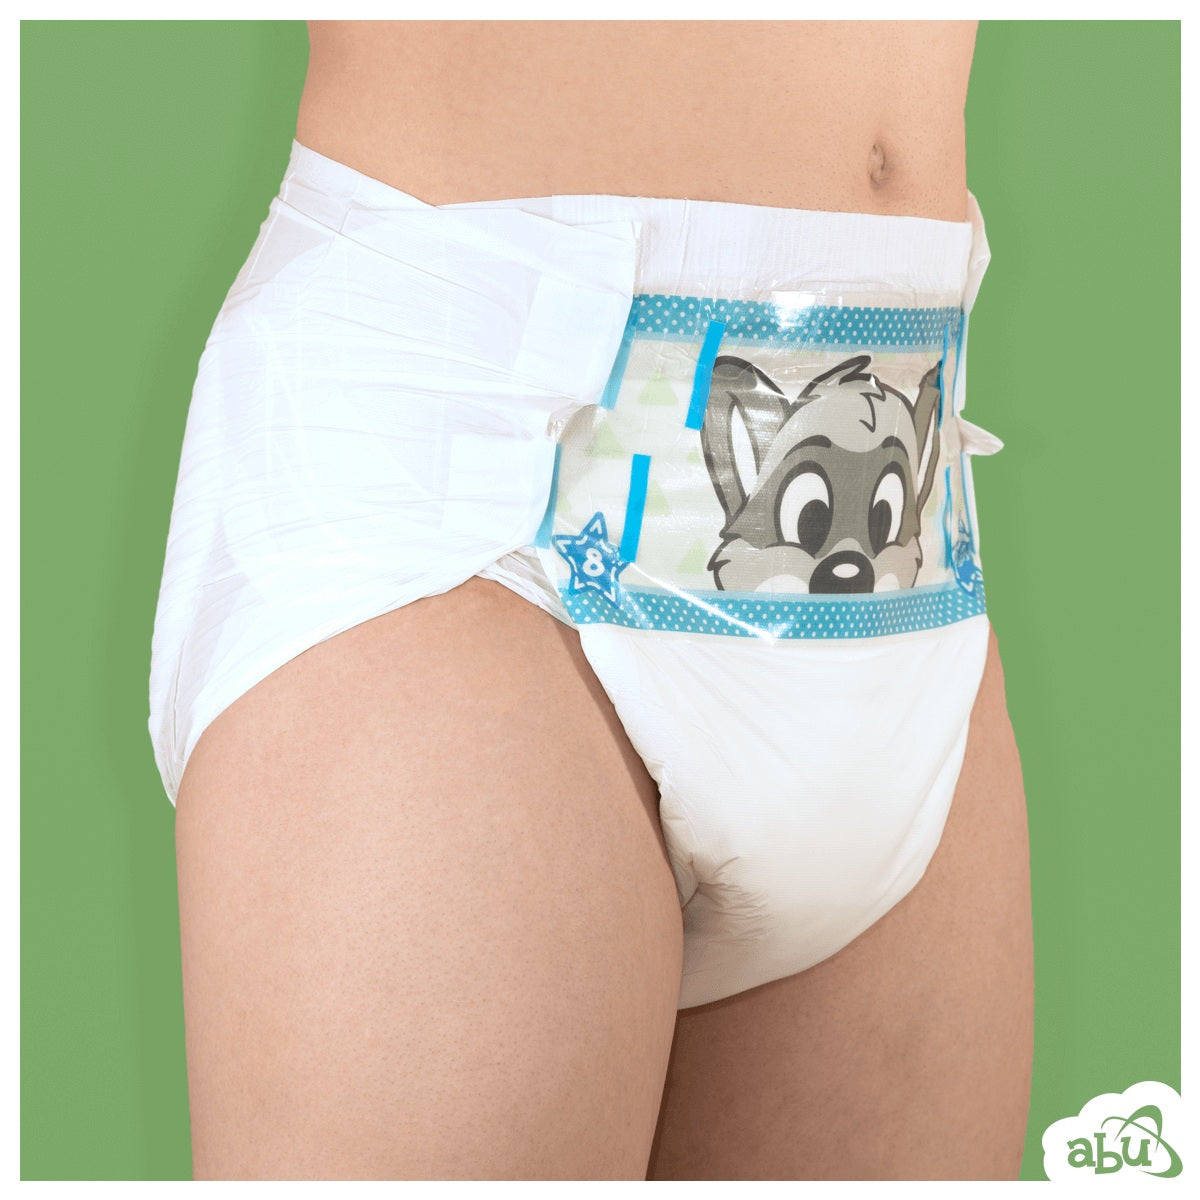 Front/side view of diaper on model with grey raccoon character printed on front.